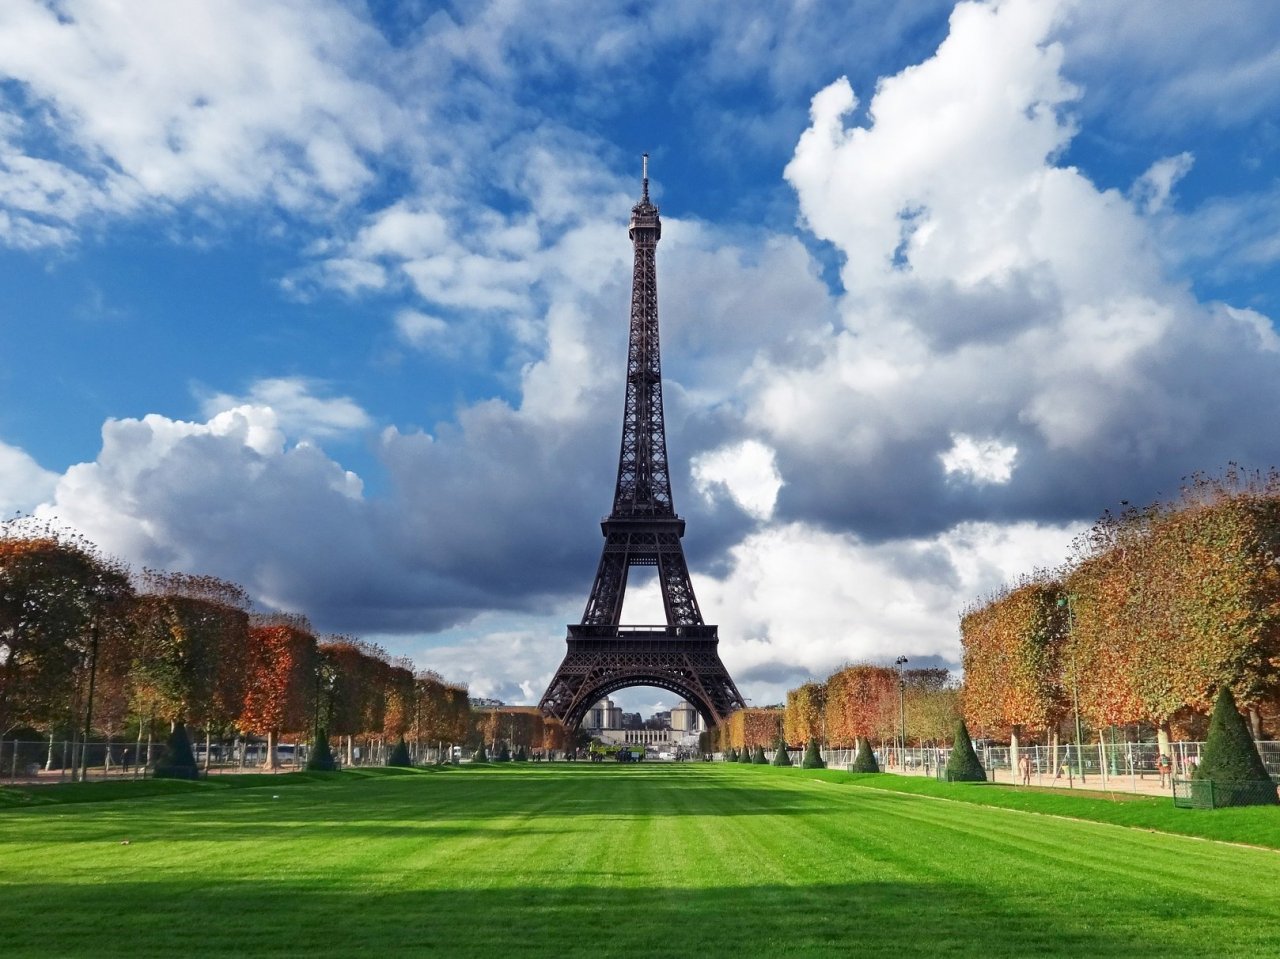 The Eiffel Tower in Paris jigsaw puzzle